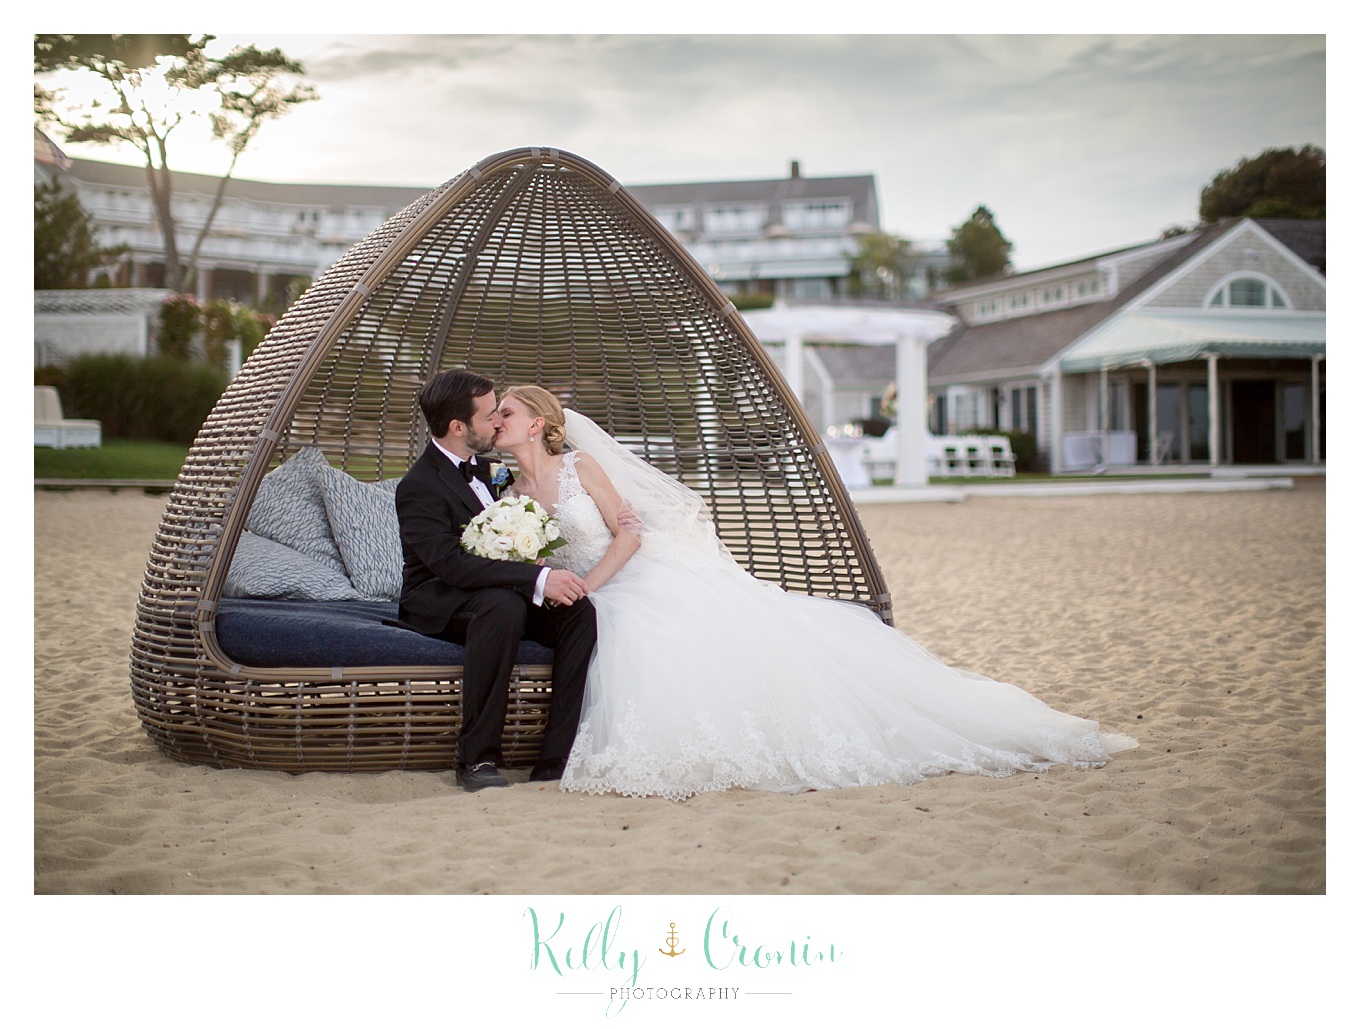 A new couple kiss in a bungalow | Kelly Cronin Photography | Cape Cod Wedding Photographer